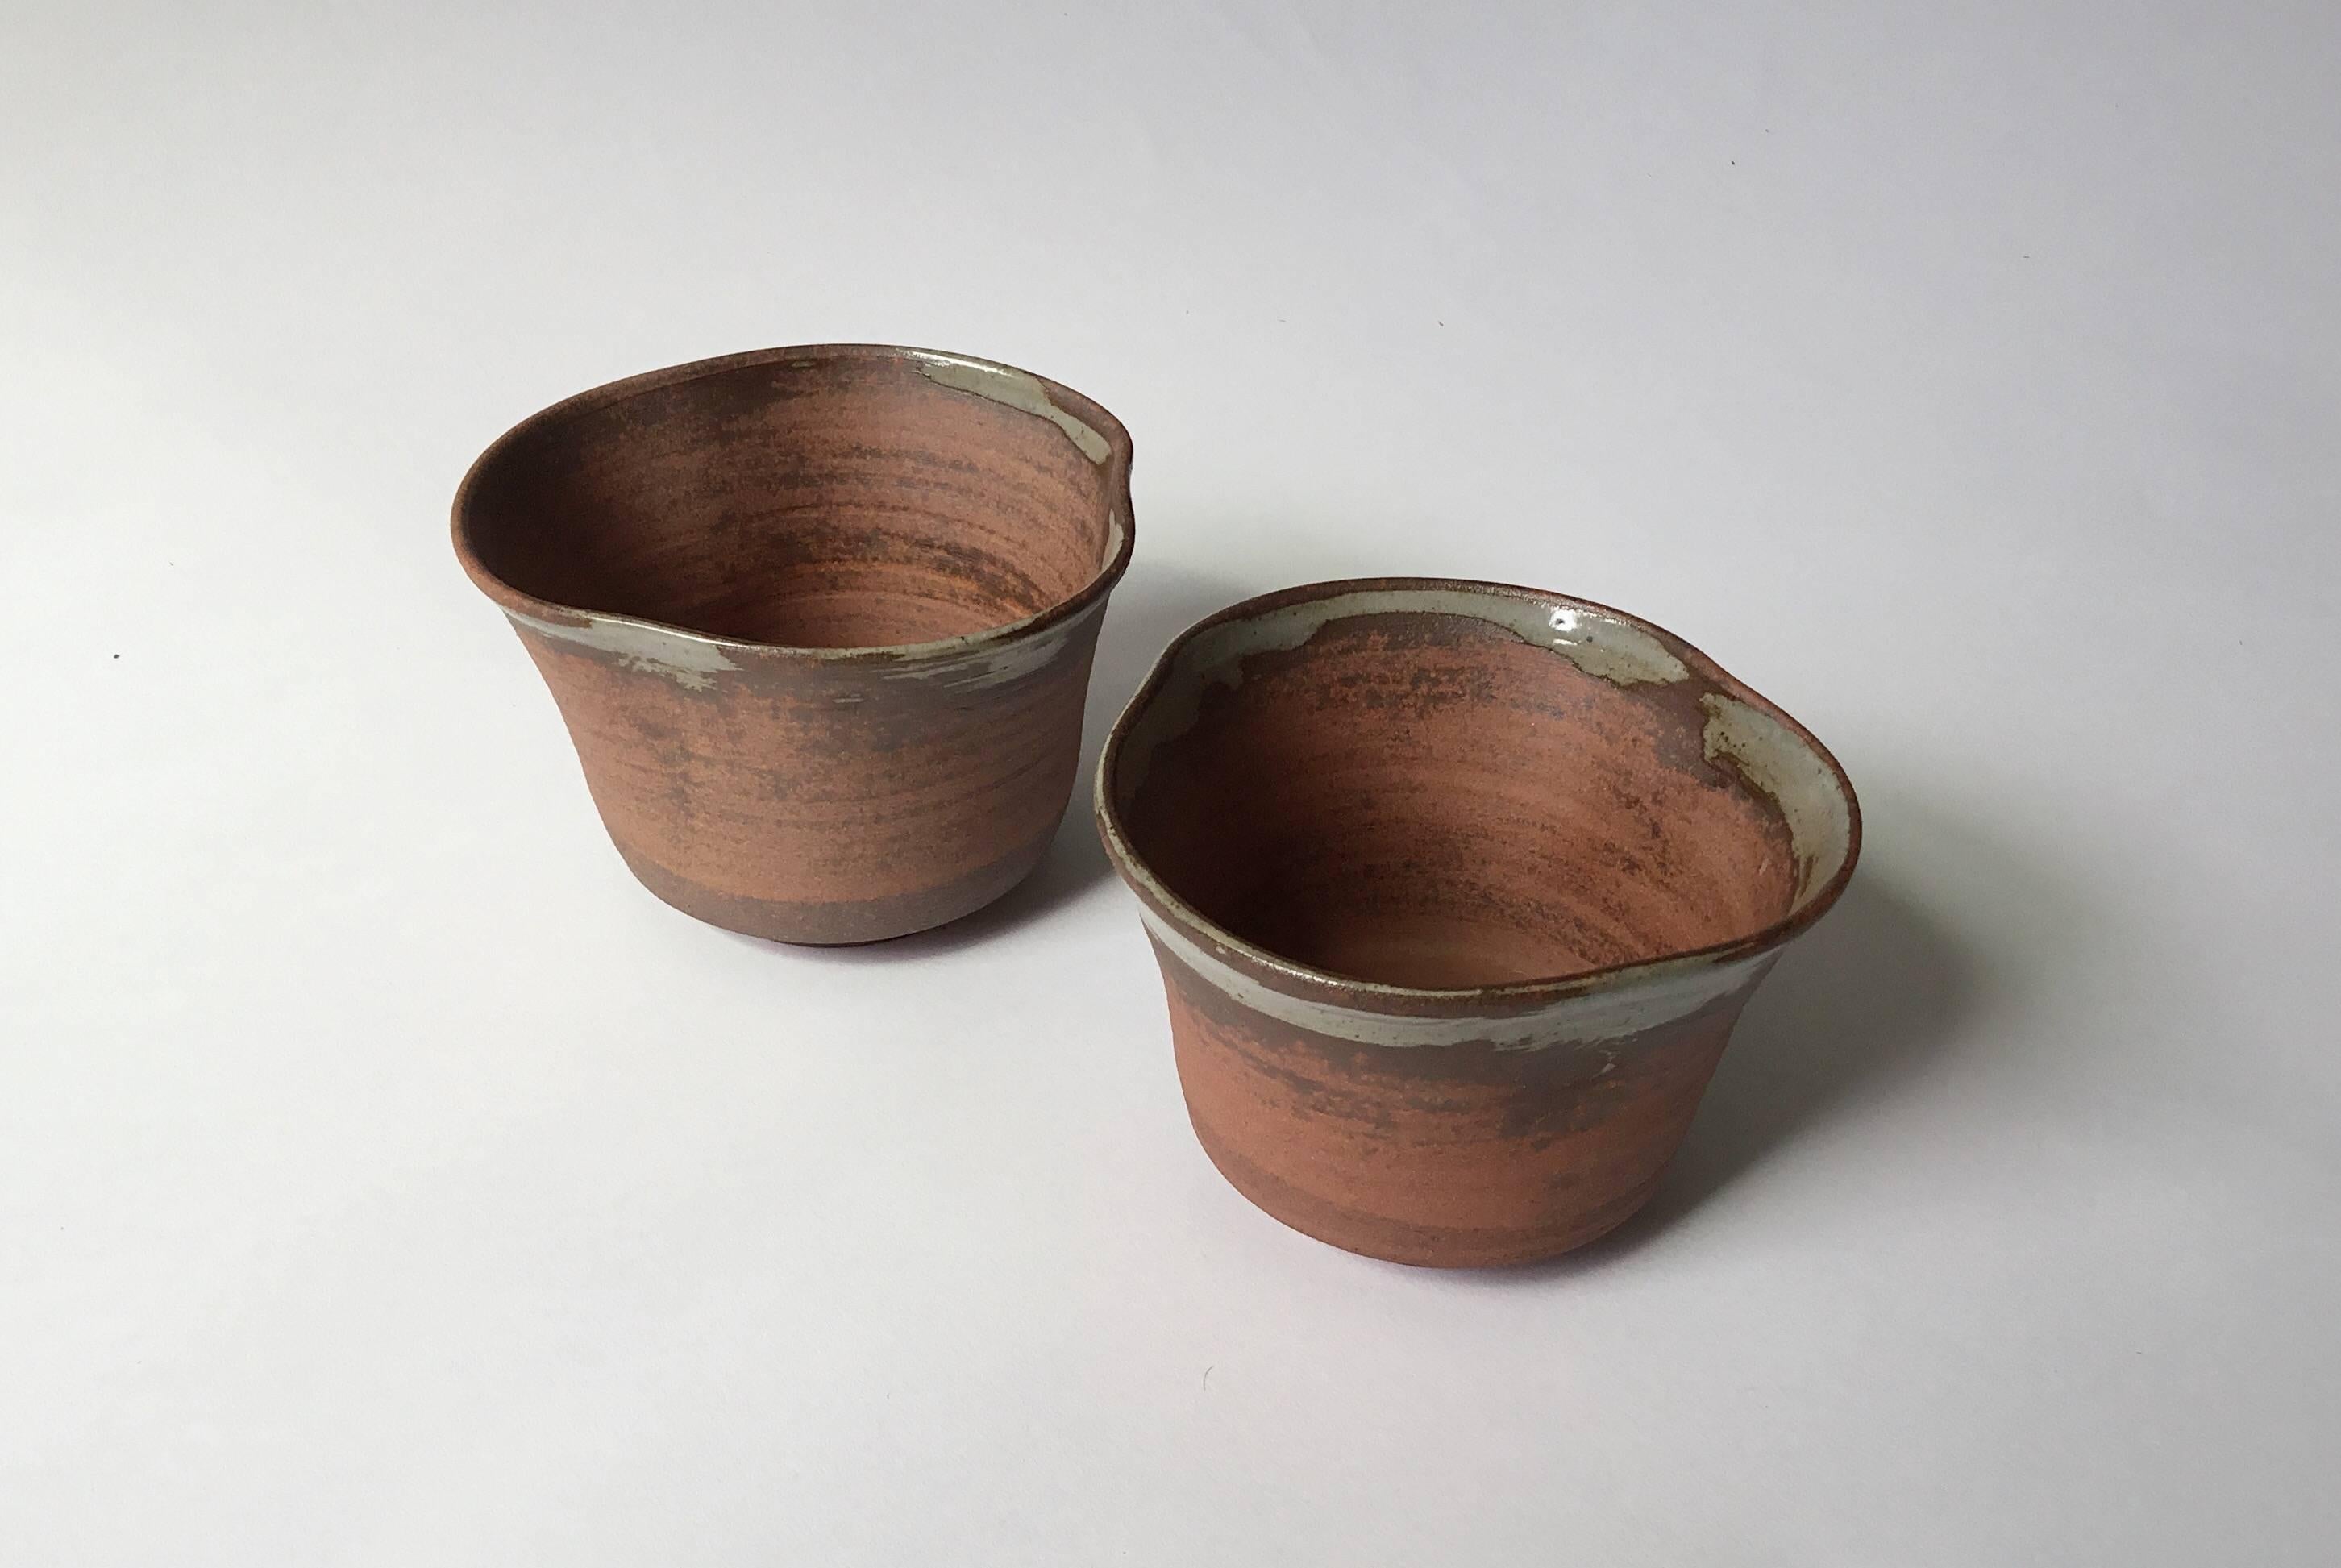 This pair of Japanese ceramic bowls were sourced from a small pottery workshop in the Nishiki market in downtown Kyoto.

Despite their uniform turned base the raw reddish clay forms have each been hand-pulled into a uniquely balance shape at the lip